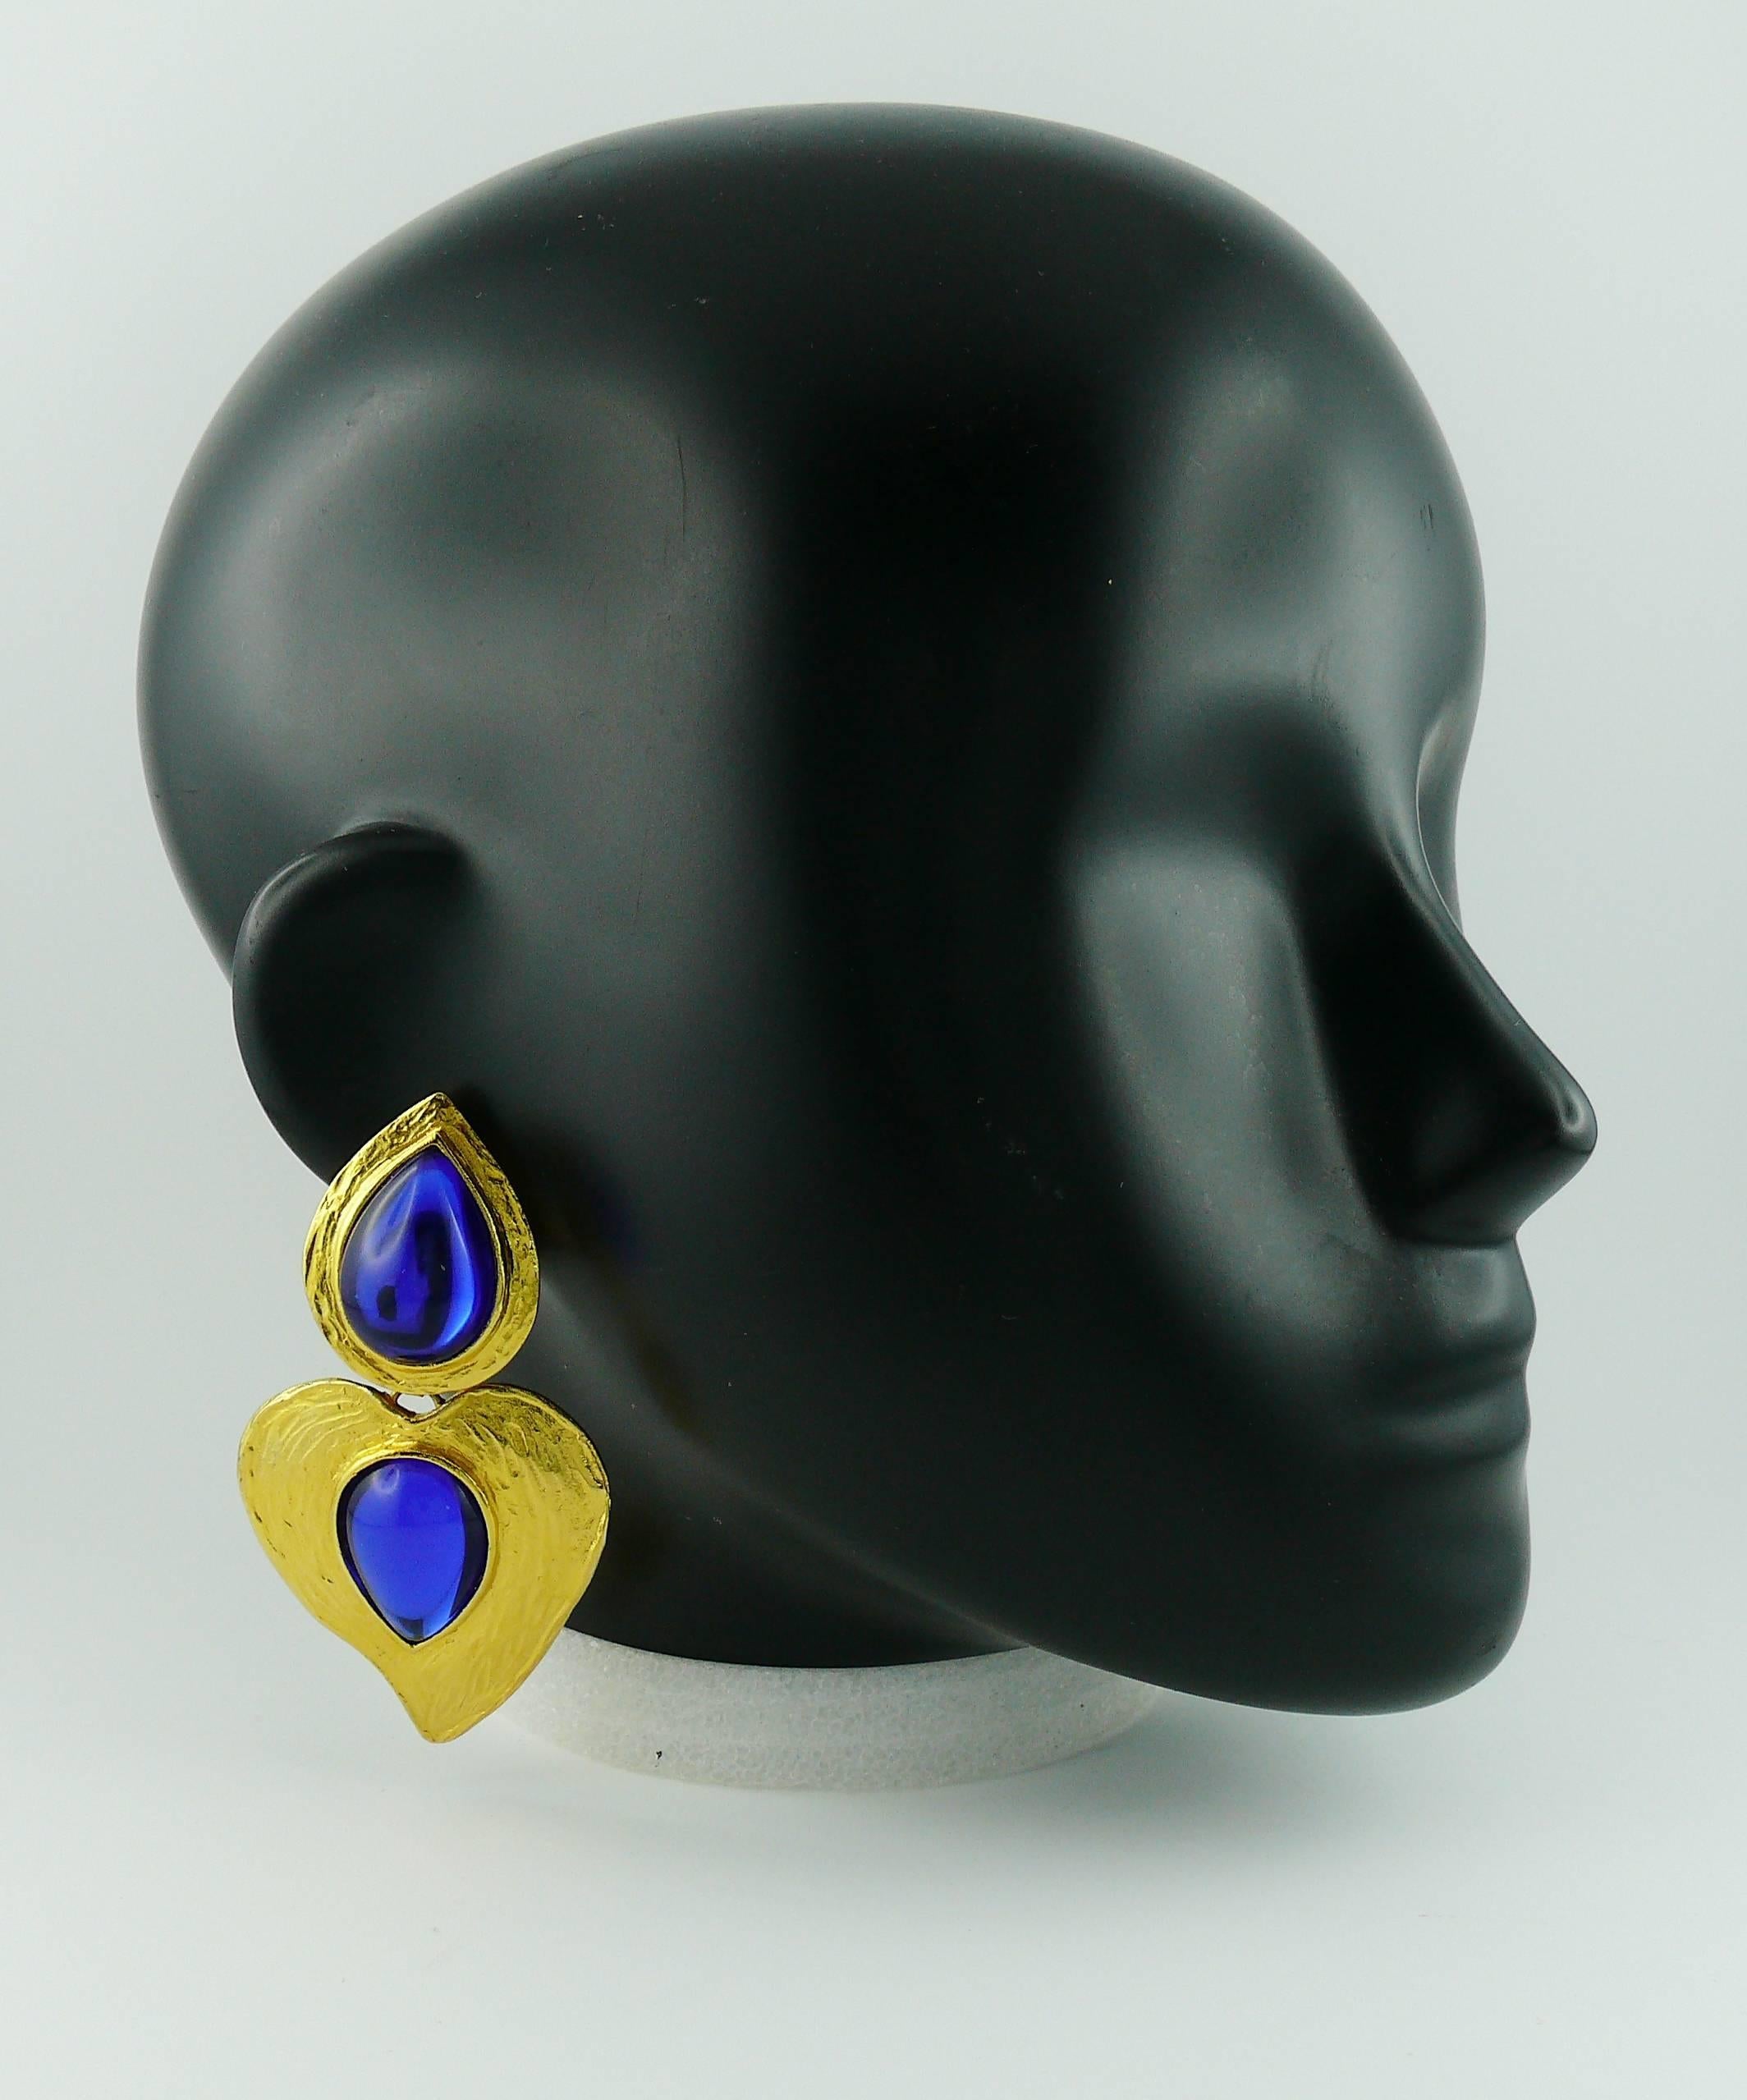 YVES SAINT LAURENT vintage textured gold tone heart dangling earrings (clip-on) featuring two deep blue glass cabochons.

This earring model is a rare find !

Marked YSL Made in France.

Indicative mesaurements : length approx. 8.2 cm (3.23 inches)